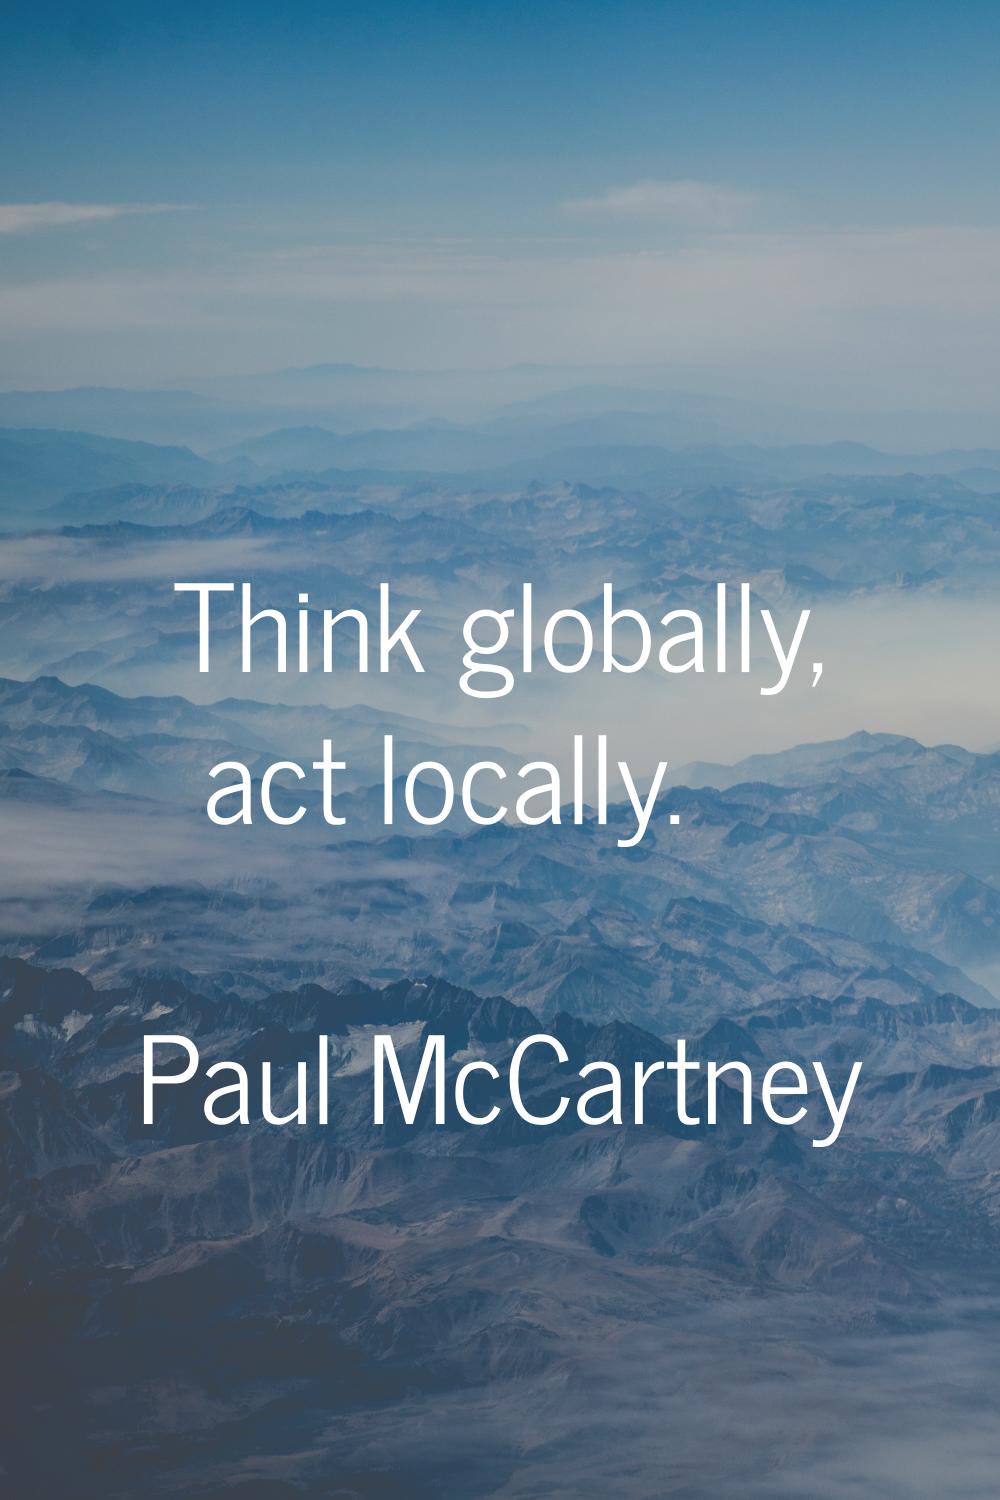 Think globally, act locally.